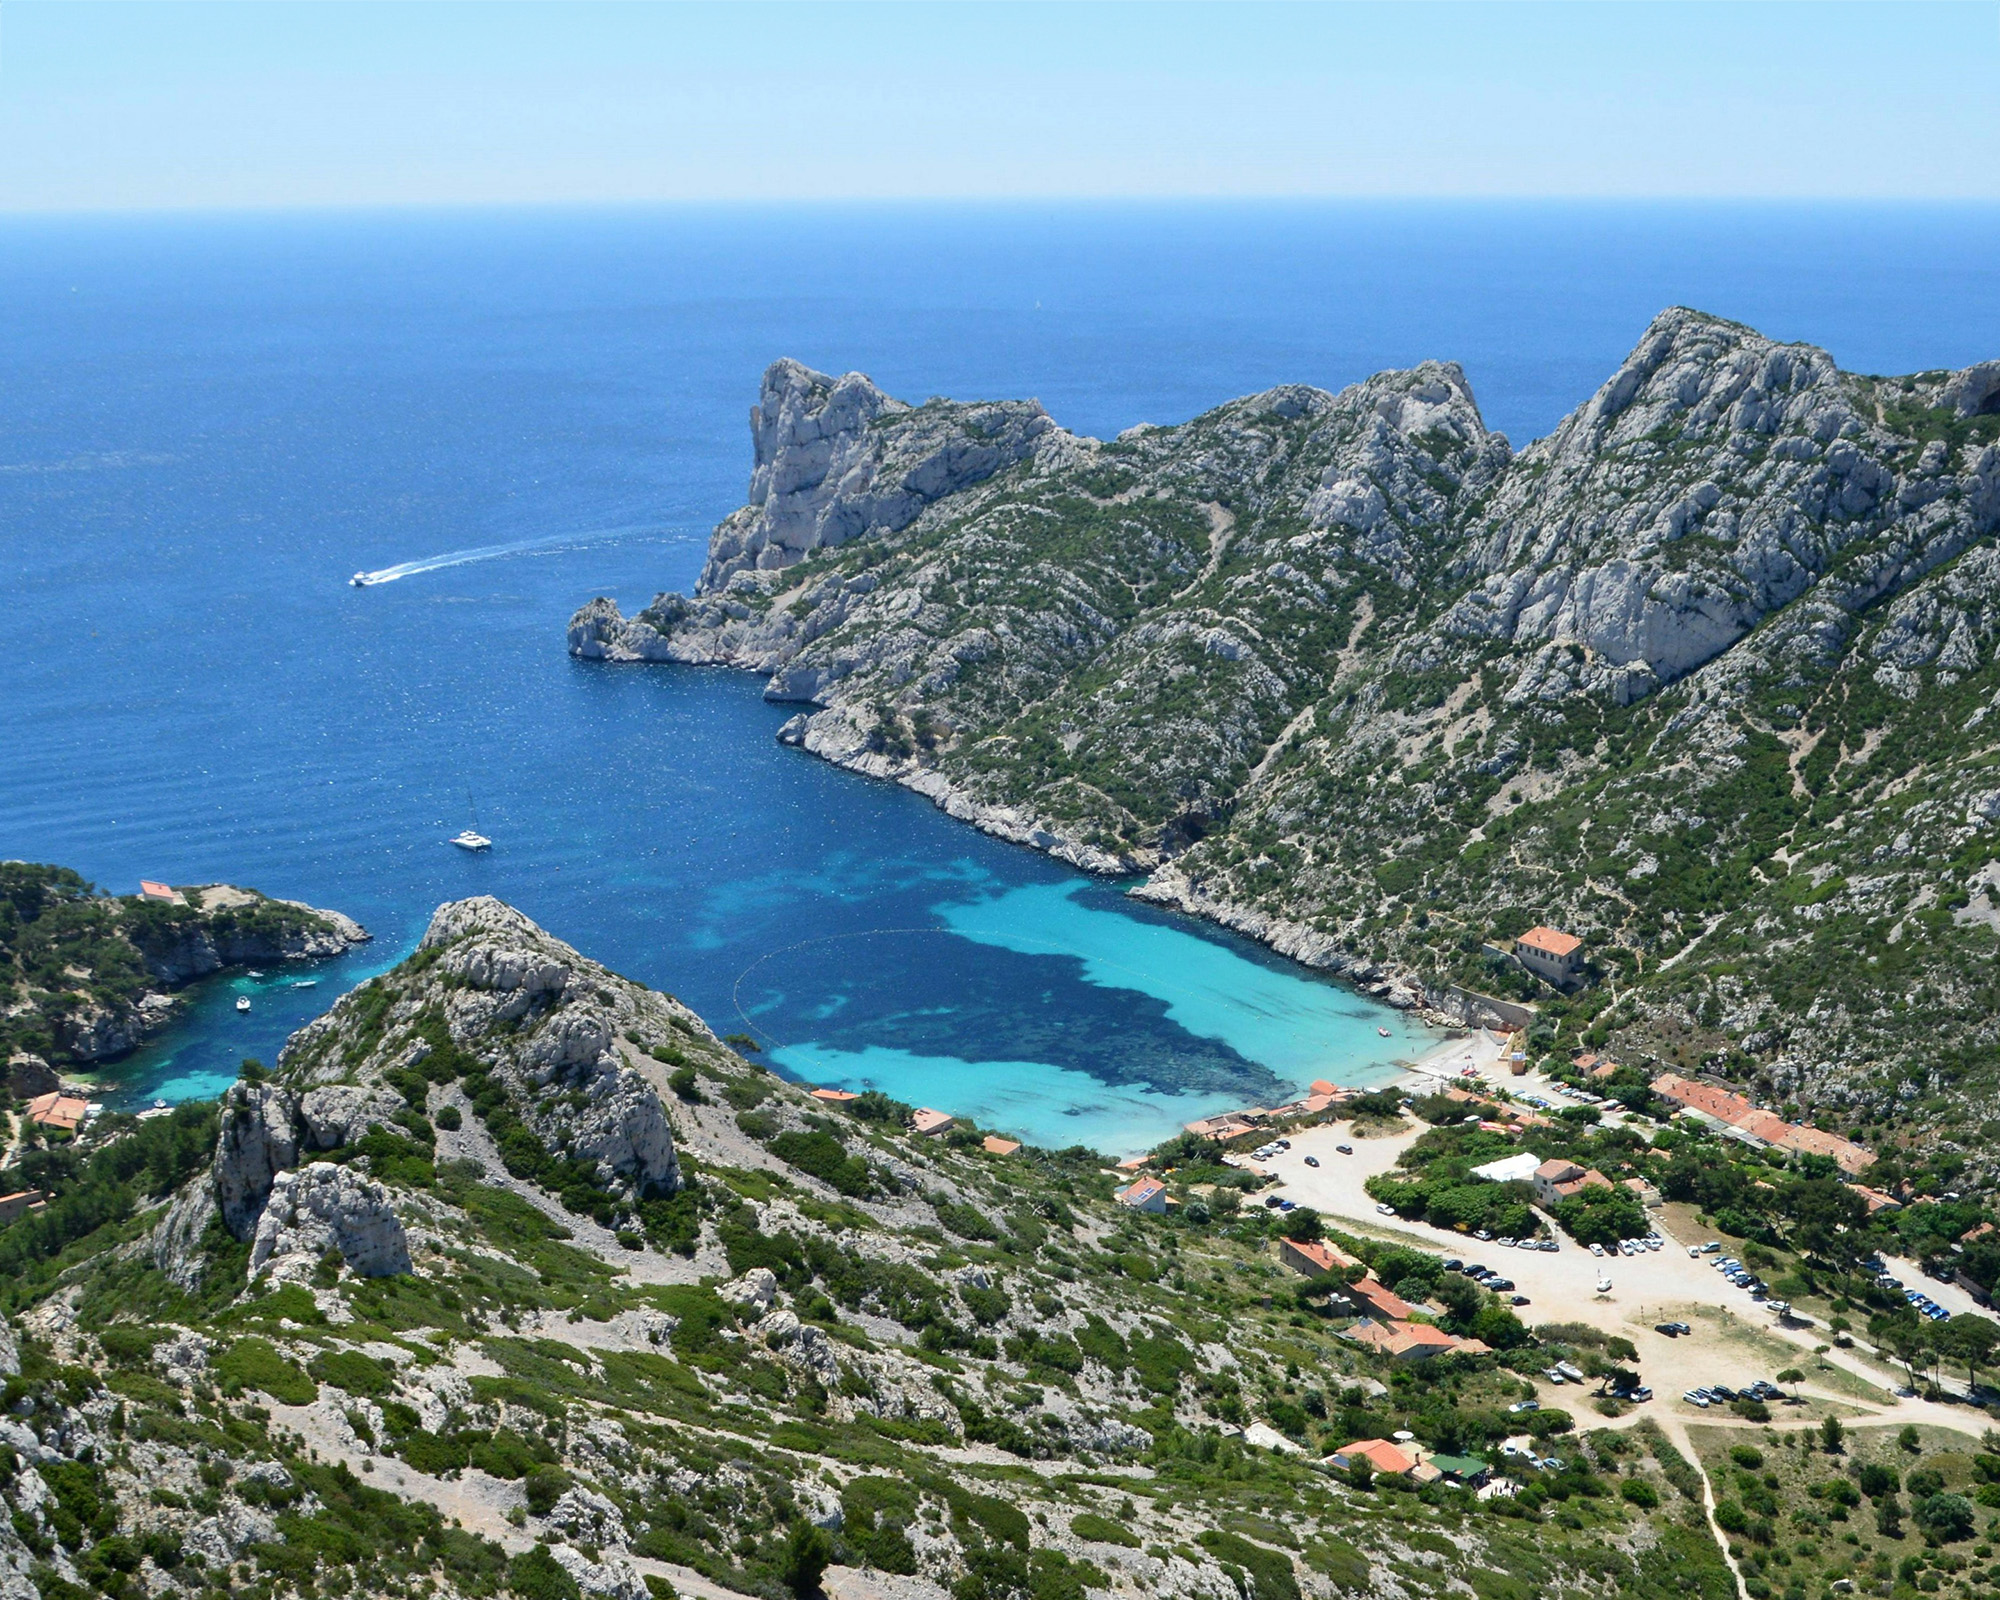 Calanque de Sormiou is a hidden gem with rocky cliffs, turquoise waters, and pristine sandy beaches.